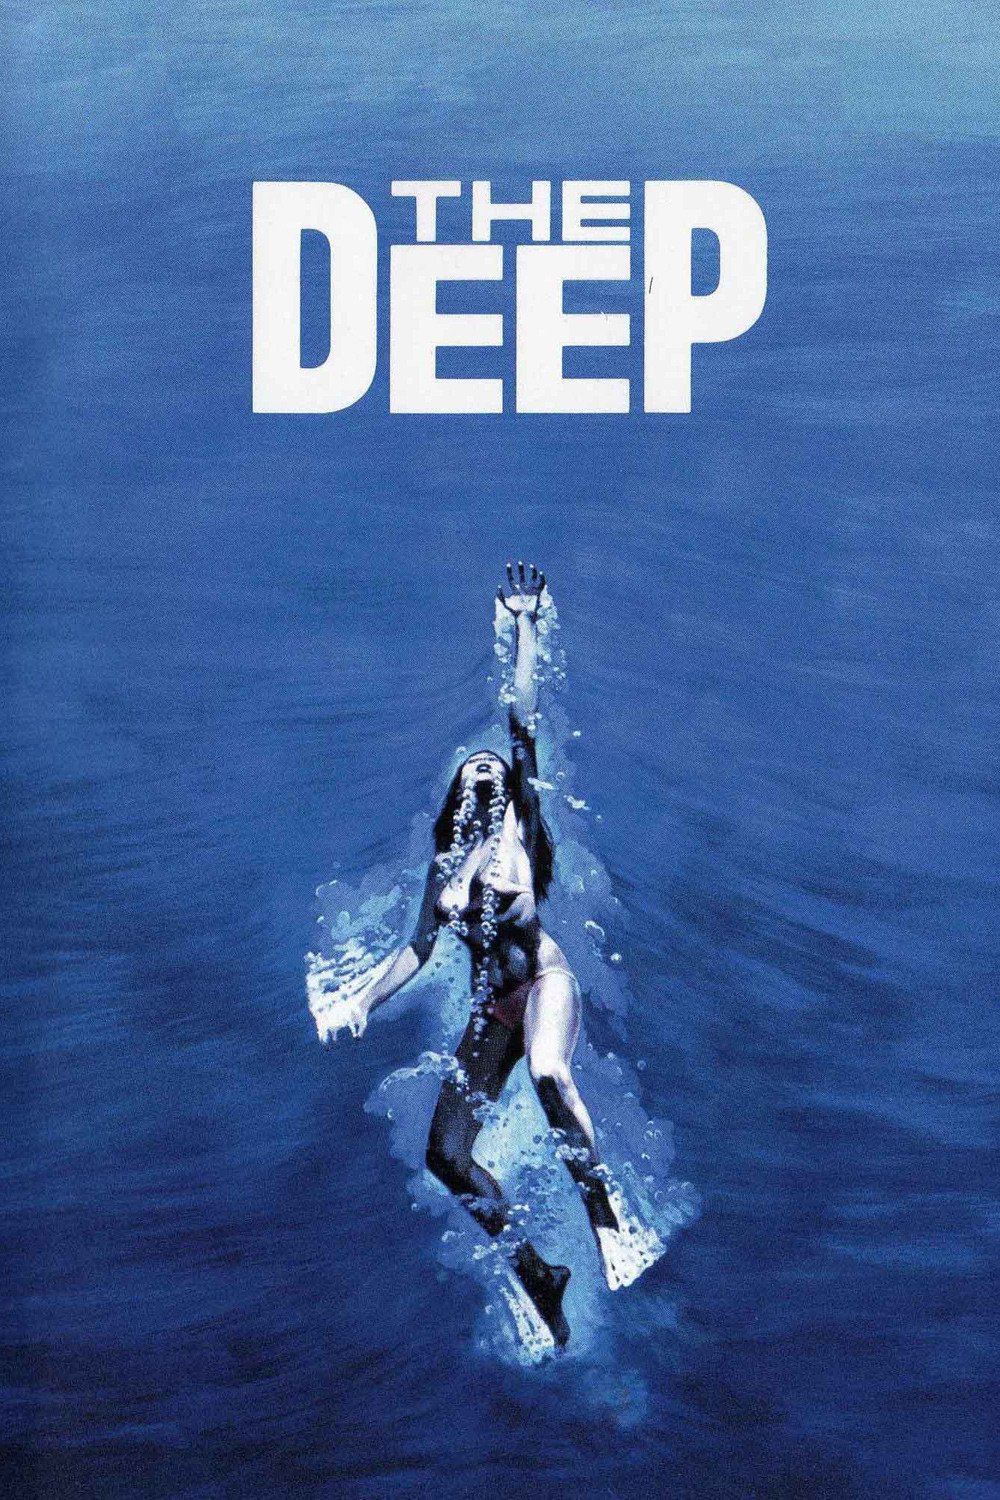 The Deep Movie Poster - ID: 157424 - Image Abyss.